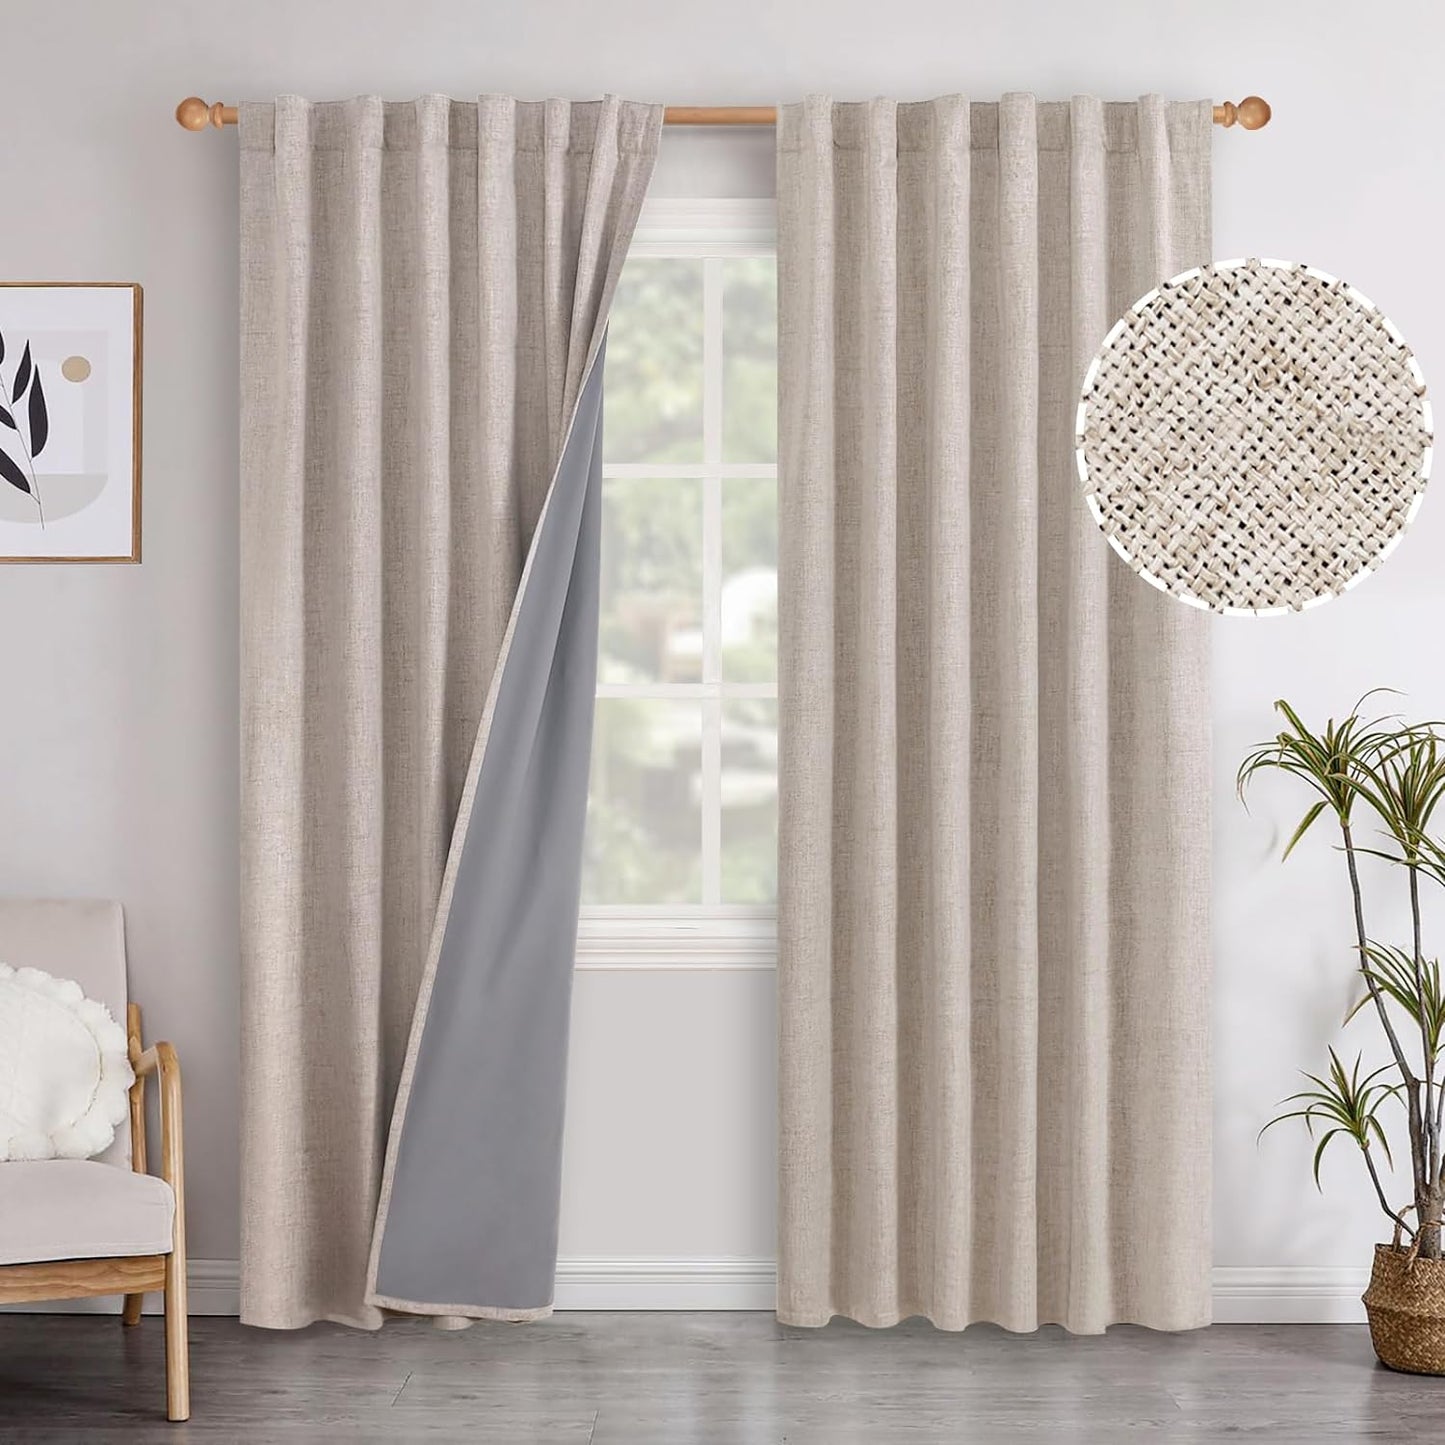 Youngstex Linen Blackout Curtains 63 Inch Length, Grommet Darkening Bedroom Curtains Burlap Linen Window Drapes Thermal Insulated for Basement Summer Heat, 2 Panels, 52 X 63 Inch, Beige  YoungsTex Back Tab/Beige 52W X 84L 